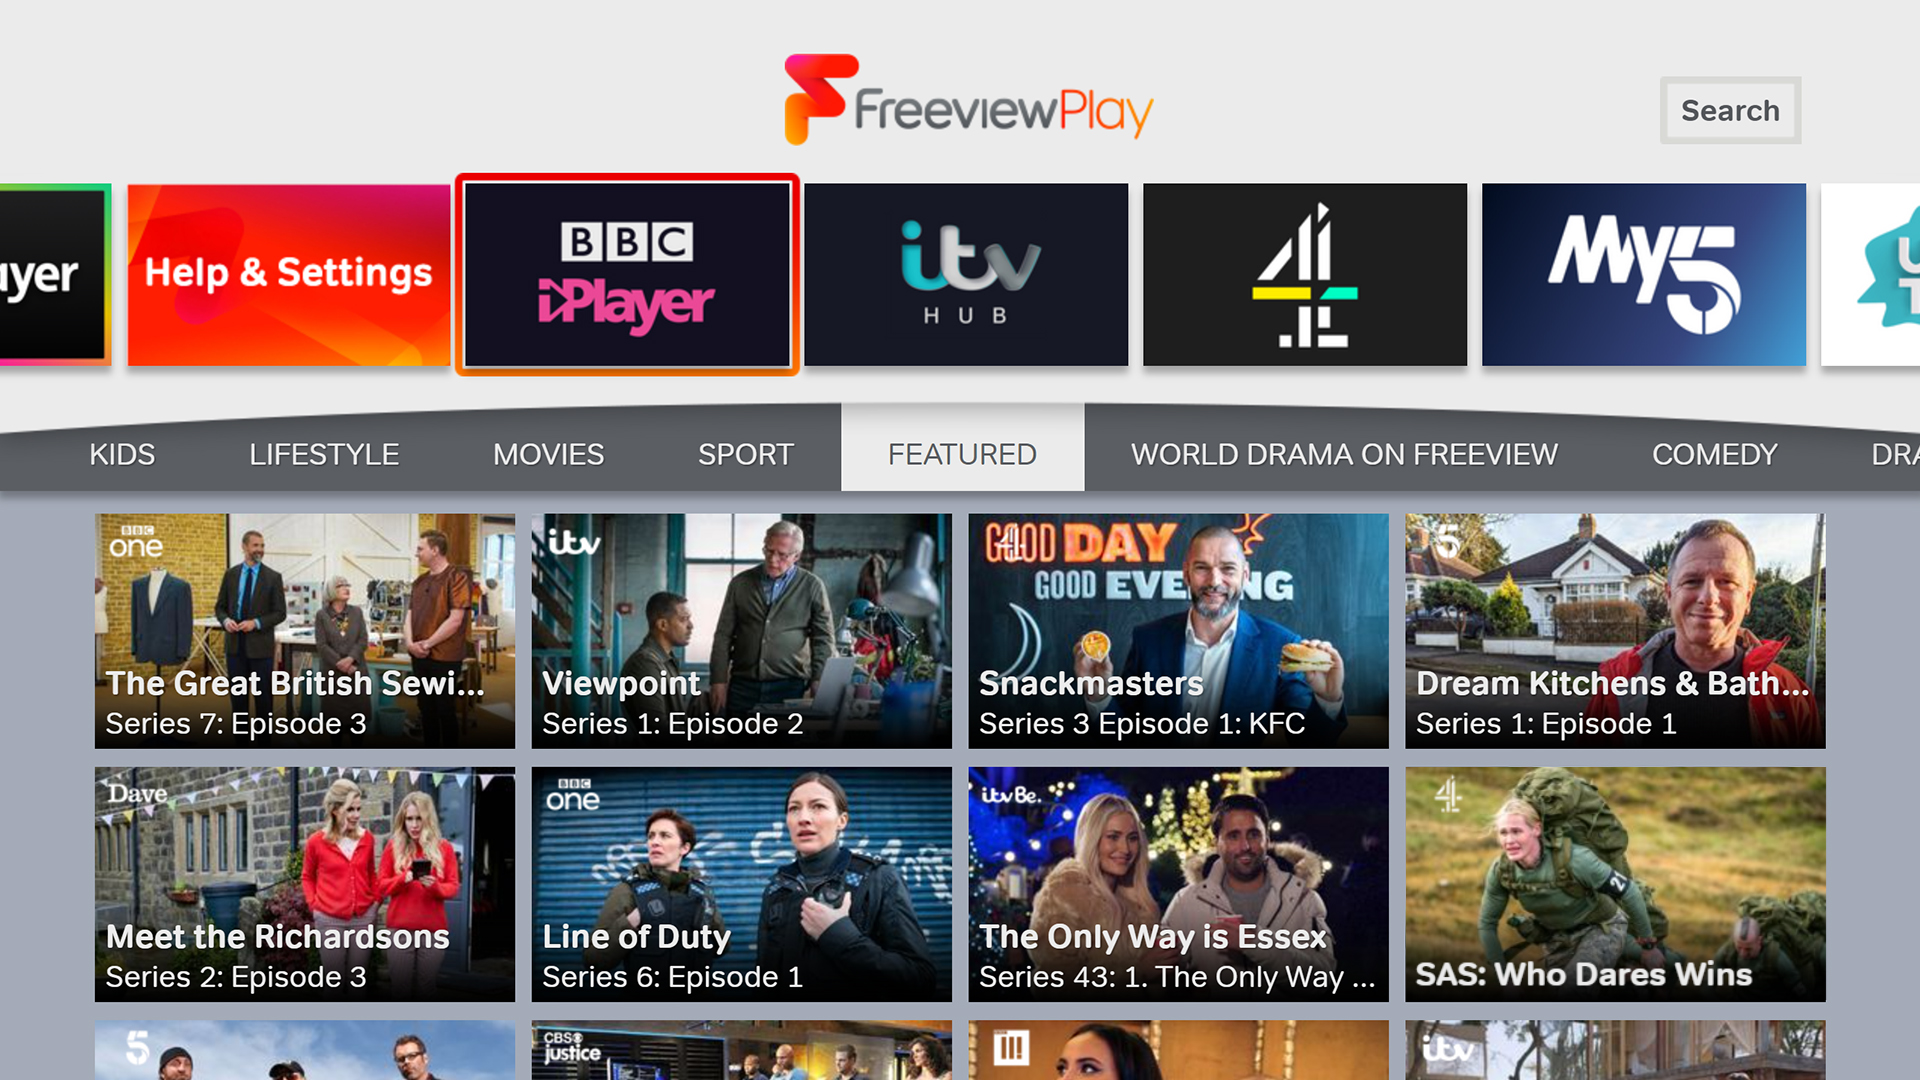 TCL TV C635K Freeview Play